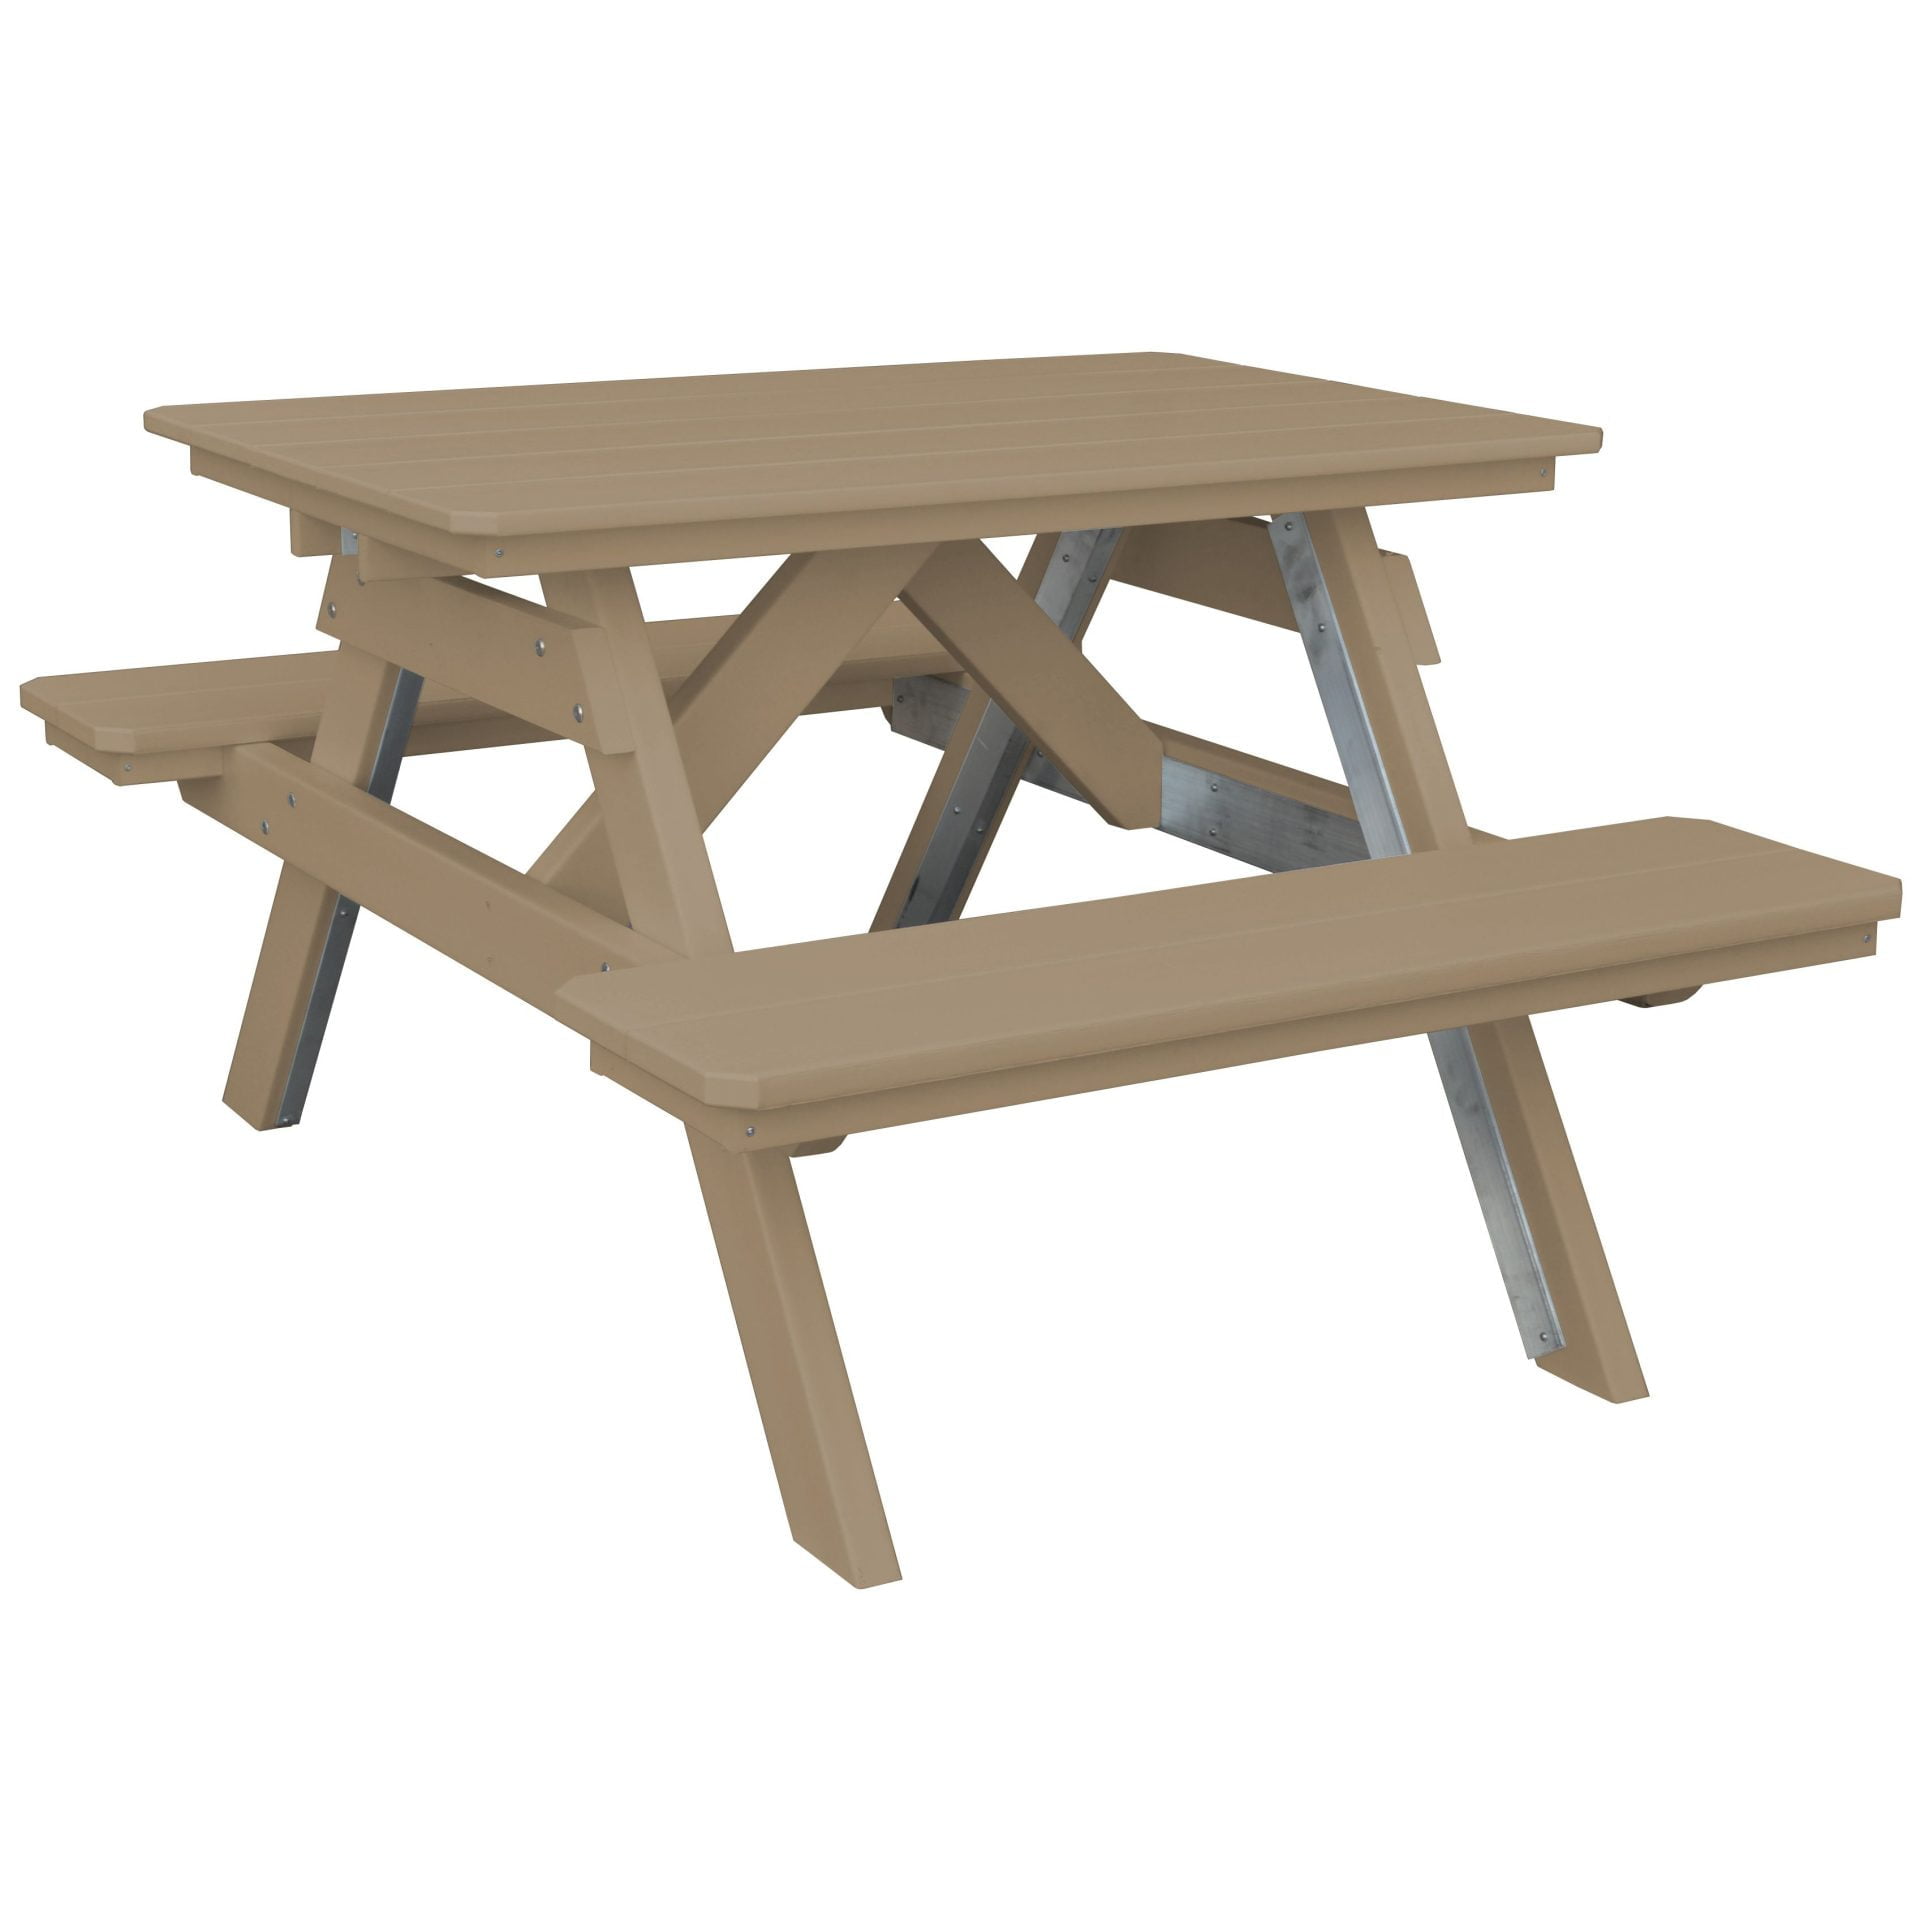 A&L Furniture Poly Lumber Picnic Table with Attached Benches